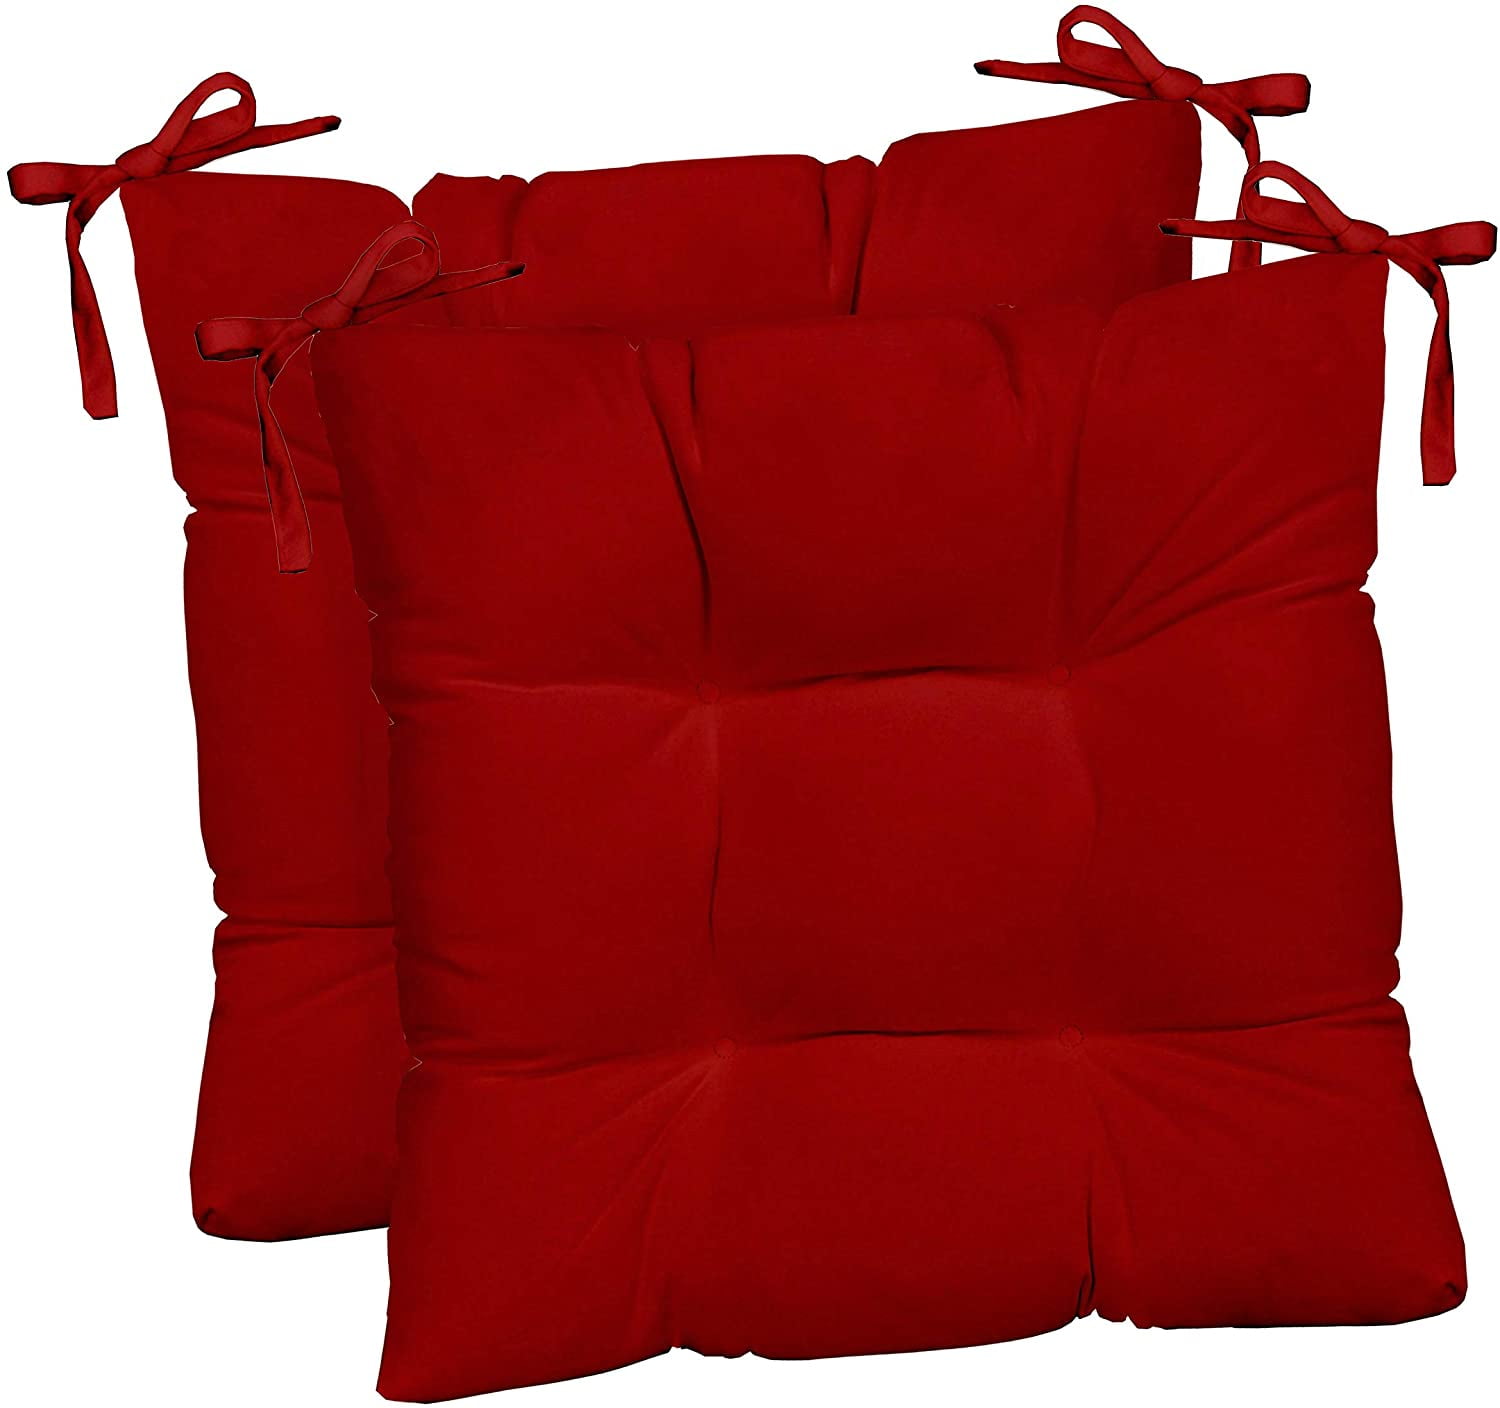 BLISSWALK Outdoor Tufted Seat Cushions 2-Pack 19x19, for Patio Bench Dining Chair Lounge Chair Seat Pad Red